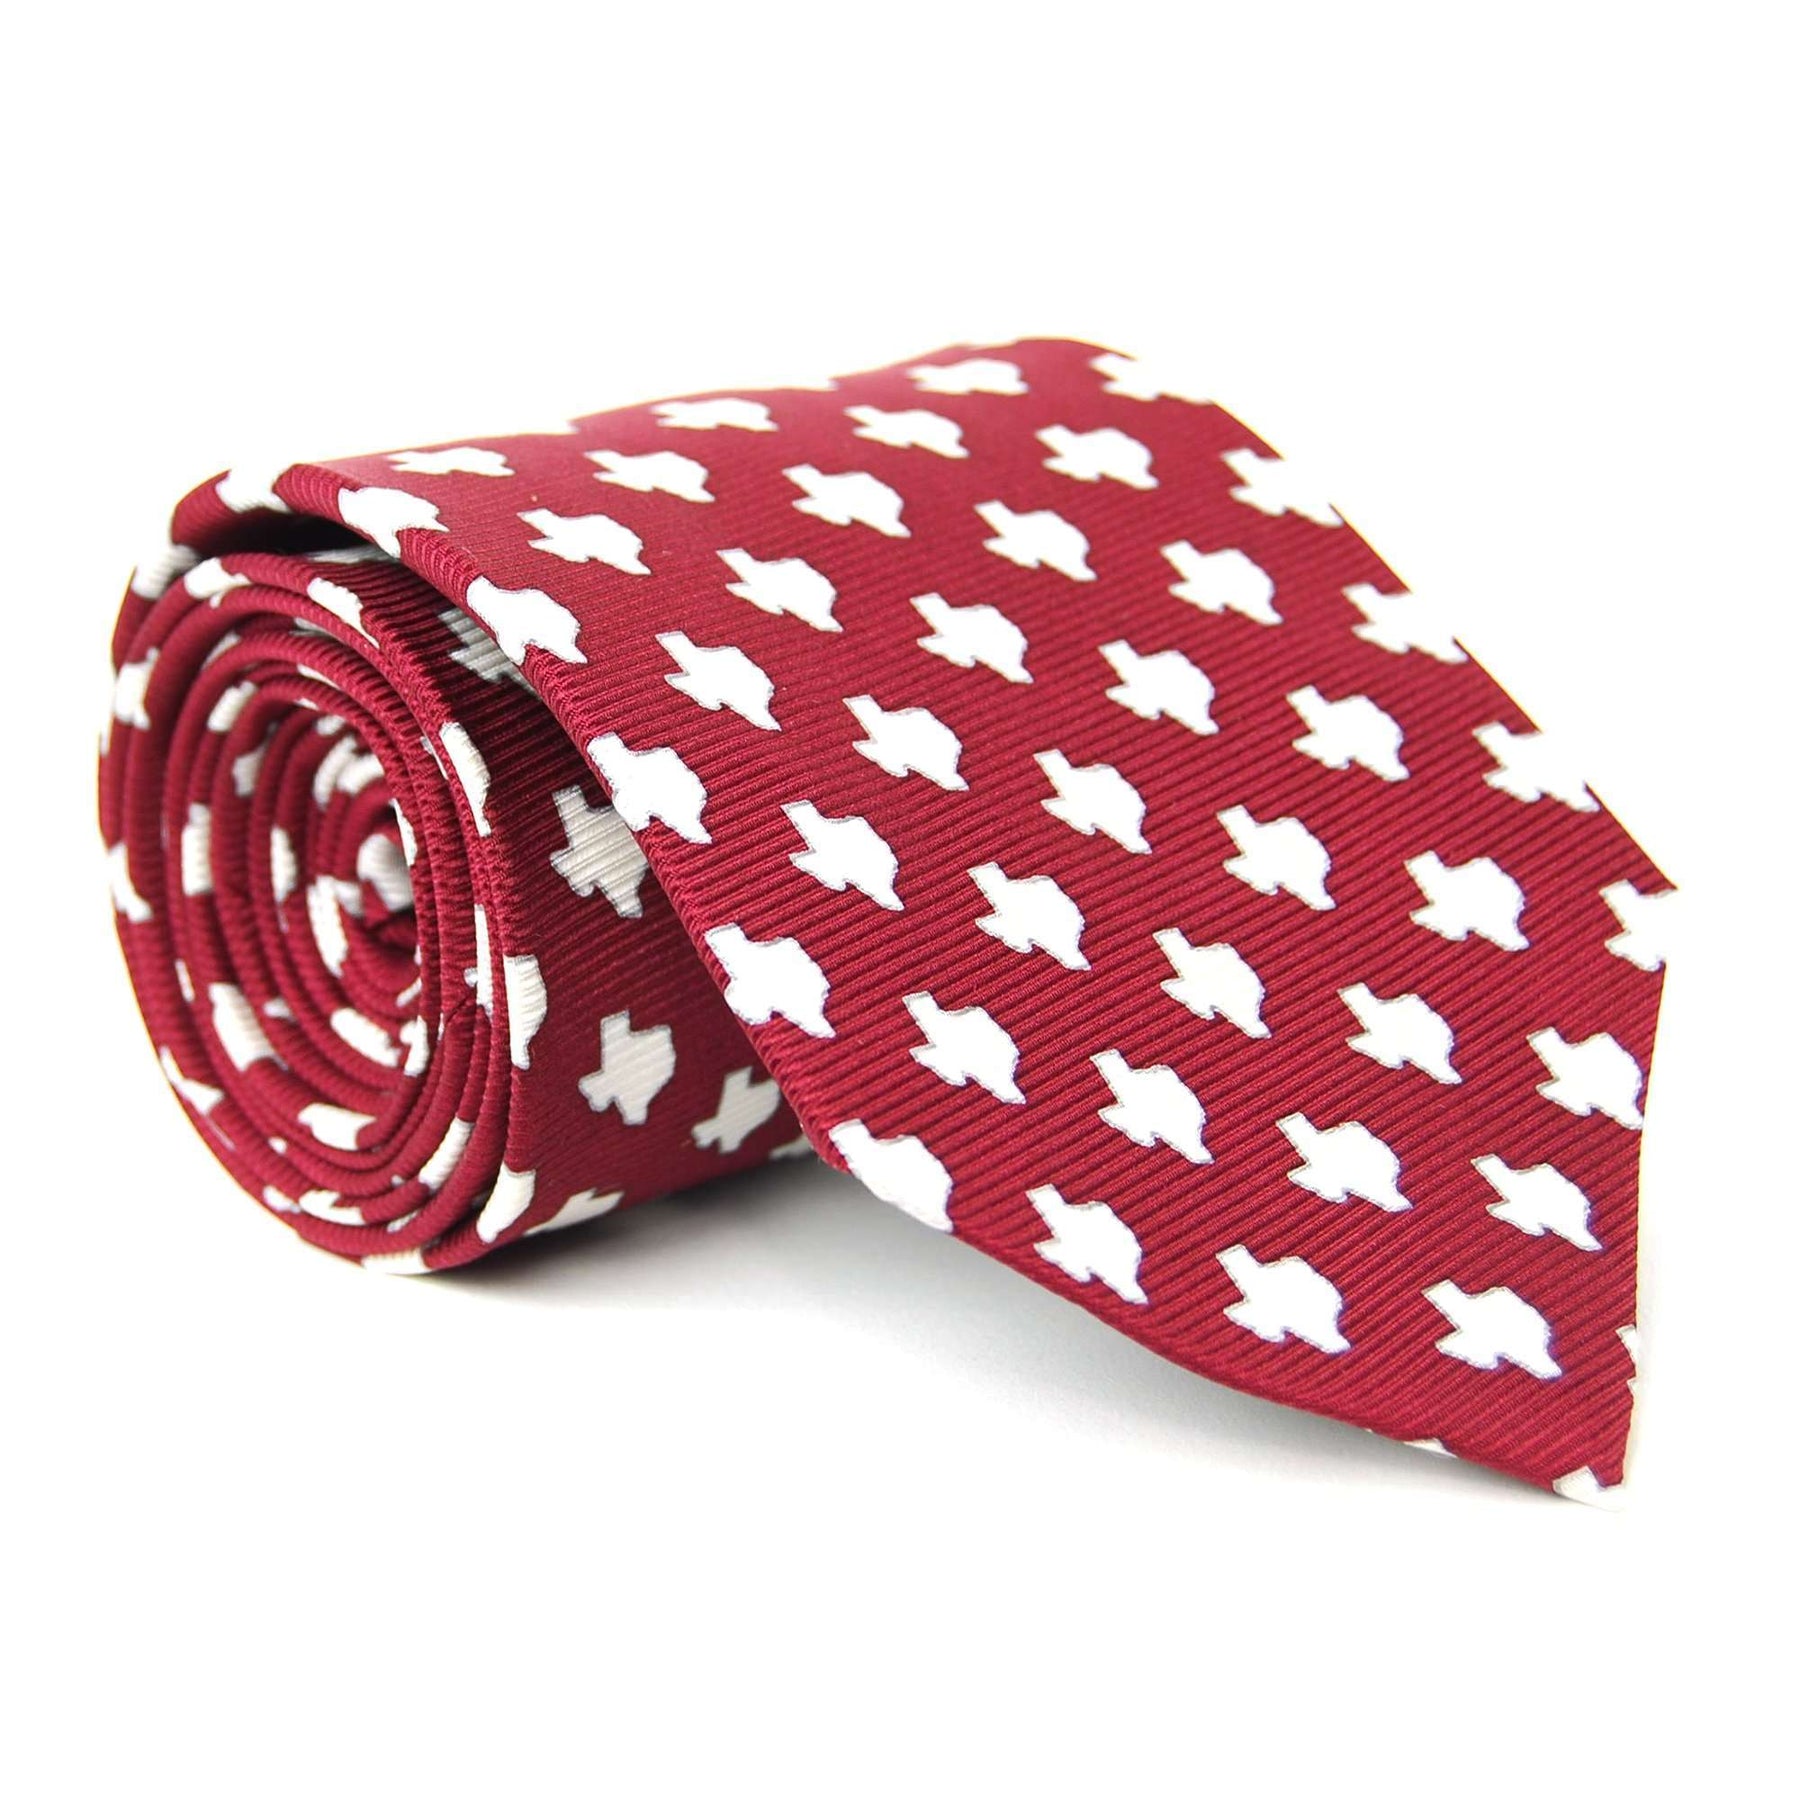 Texas State Tie